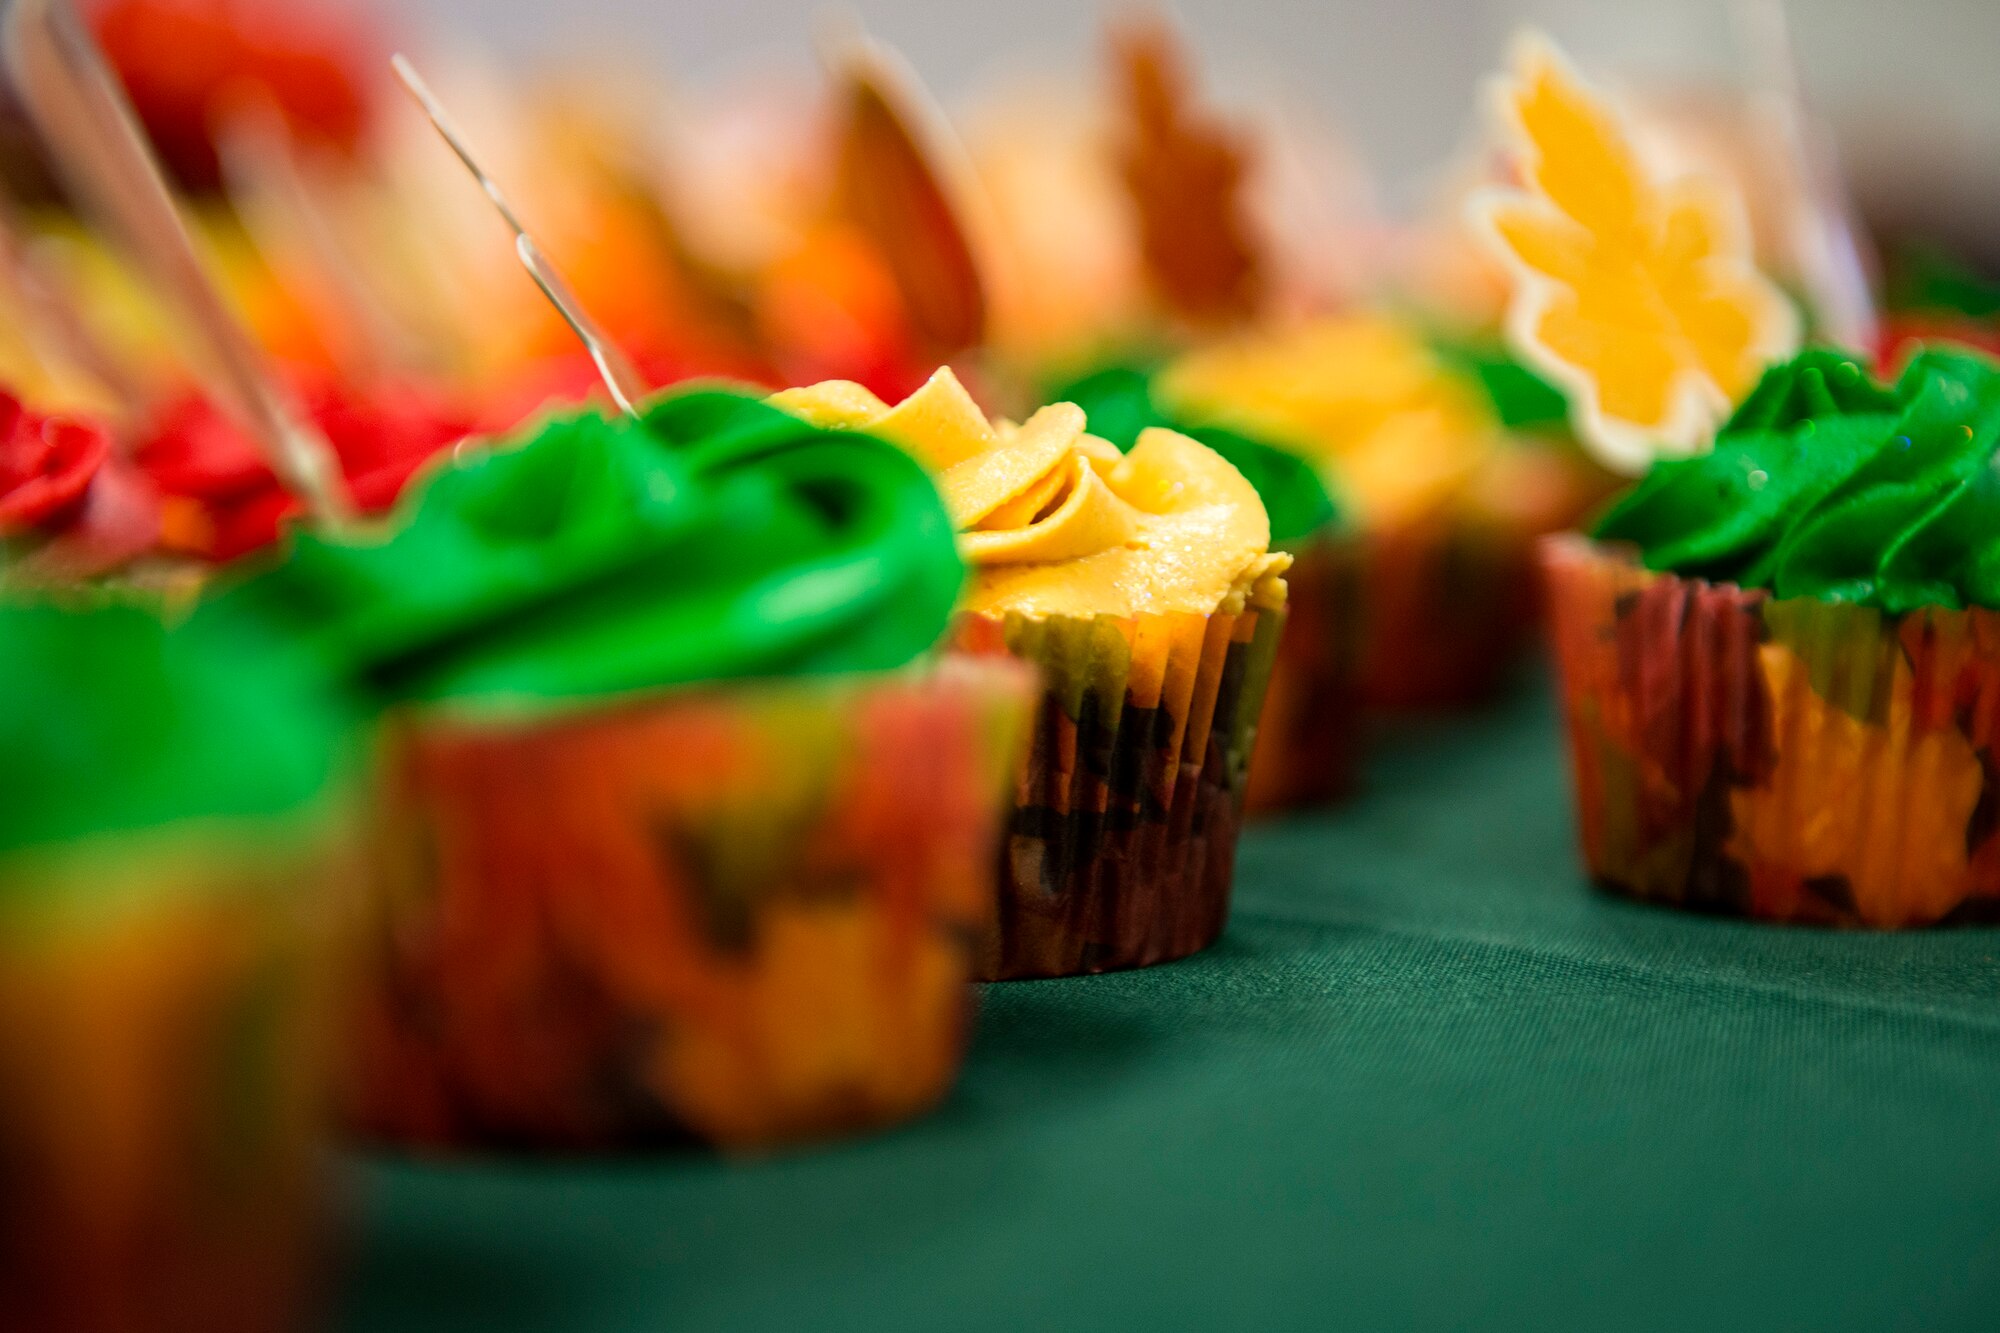 Cupcakes rest on a table during the Annual Airmen’s Thanksgiving luncheon, Nov. 14, 2017, at Moody Air Force Base, Ga. Moody Chiefs Group, with the support of various base organizations, held the luncheon because many Airmen are unable to return home for Thanksgiving. (U.S. Air Force photo by Airman 1st Class Erick Requadt)